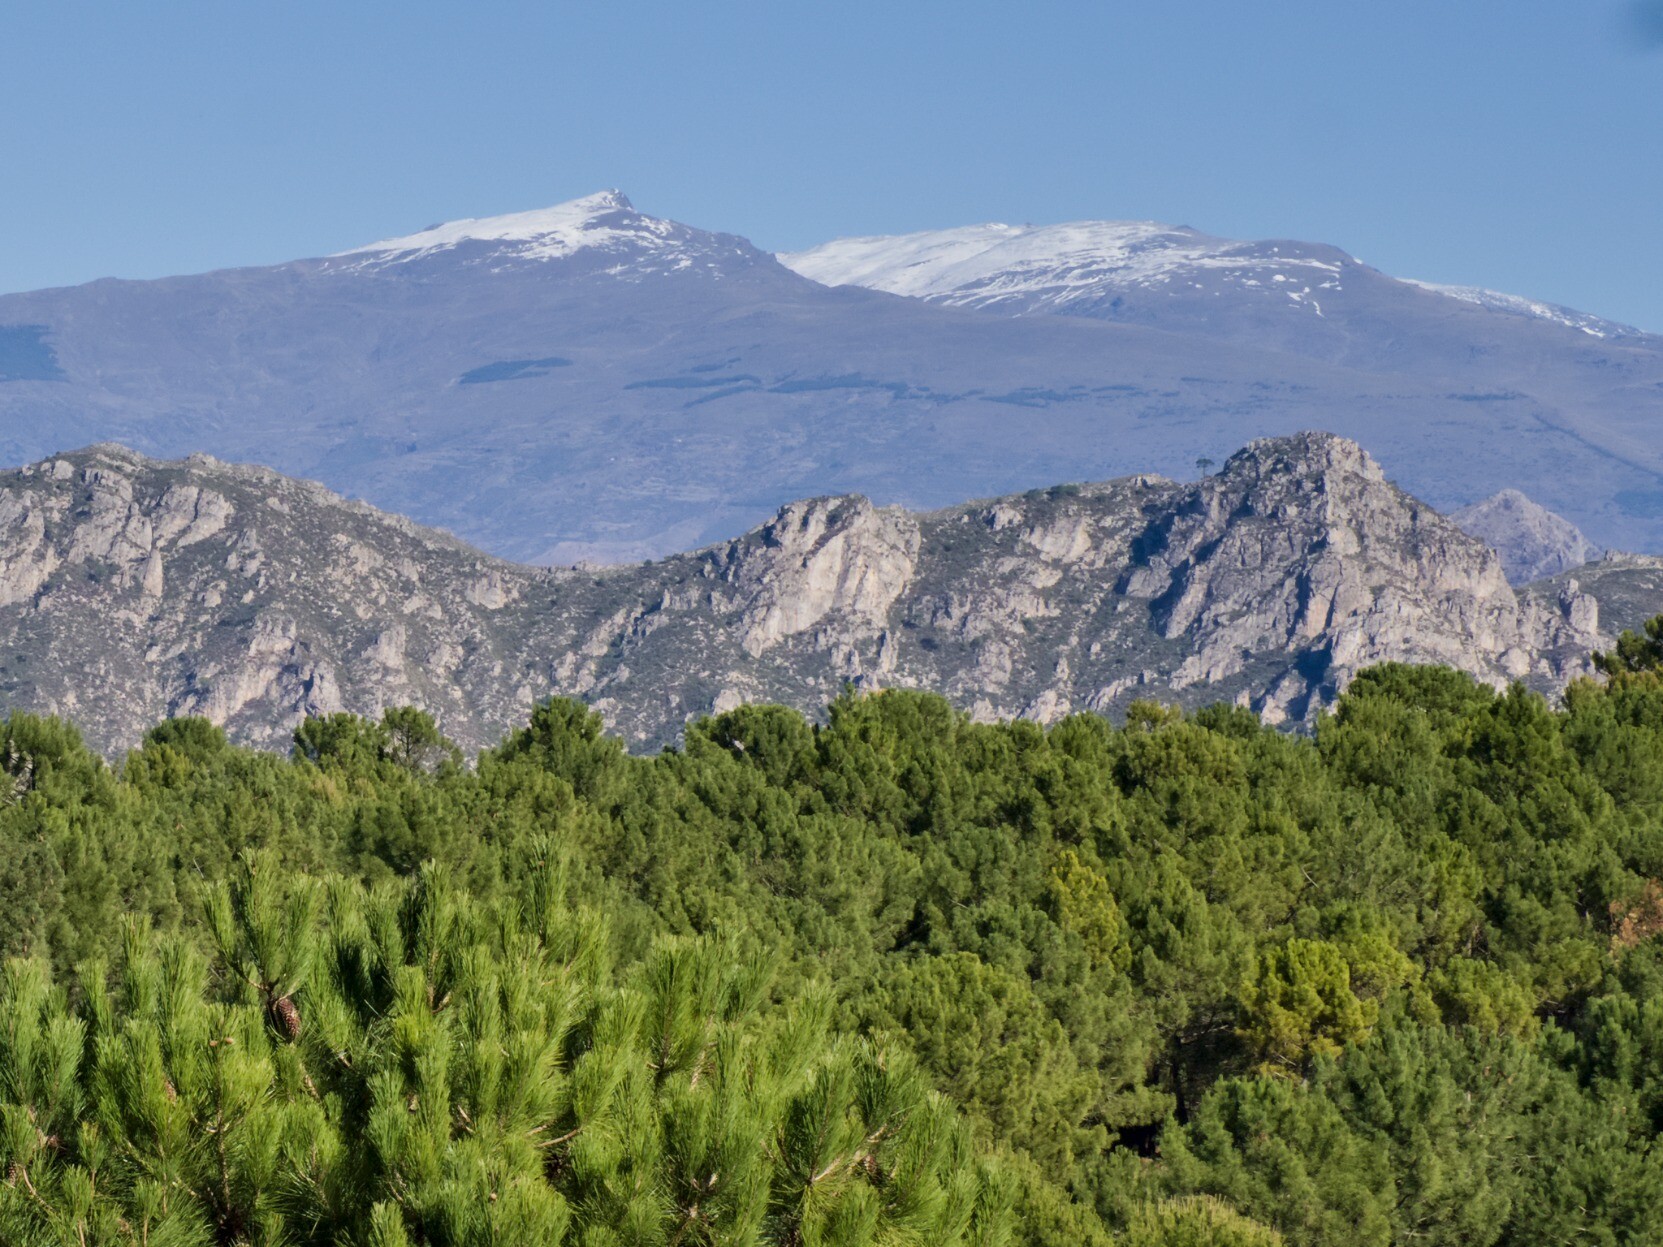 The south western aspect of the Spain's Sierra Nevada with Cerro de Caballo, Tajo de los Machos and Cerrillo Redondo with some snow cover. In a good winter this whole view would be a wall of white.